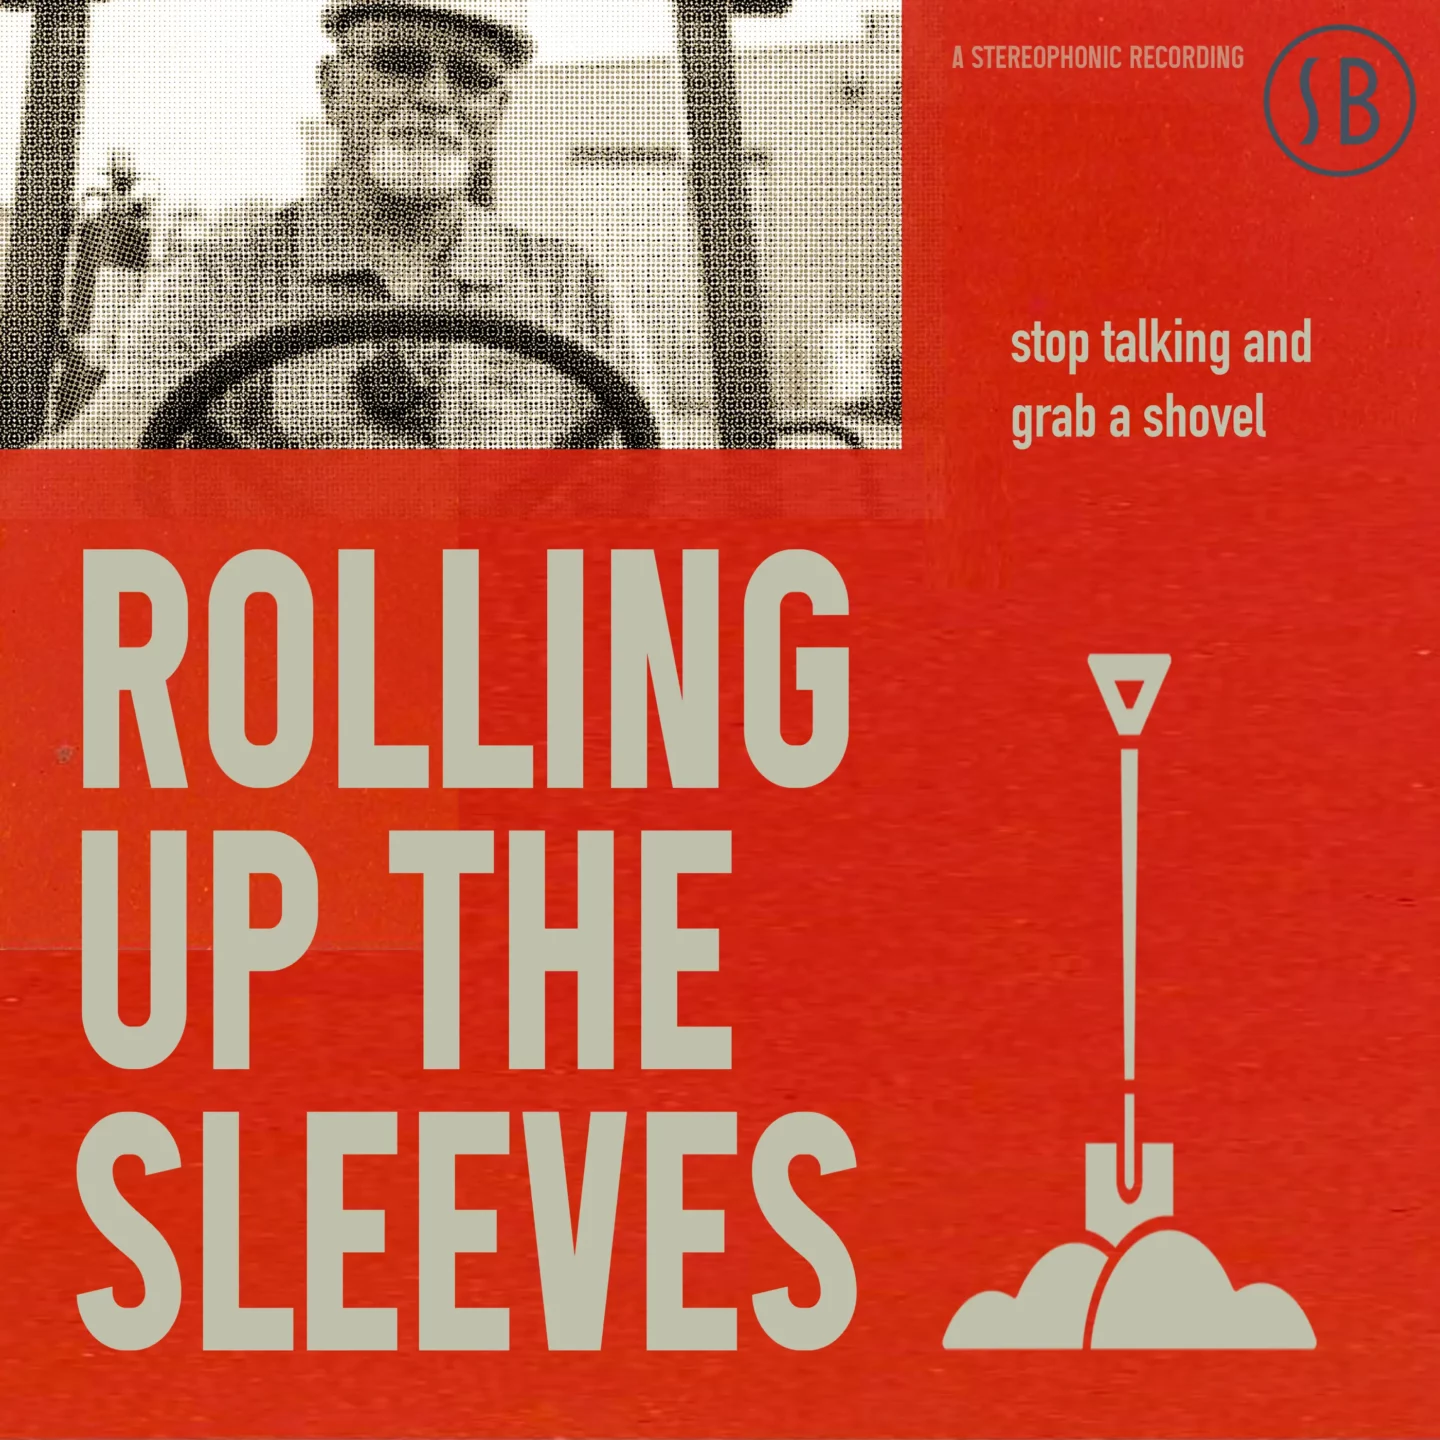 Album cover art for Rolling Up the Sleeves